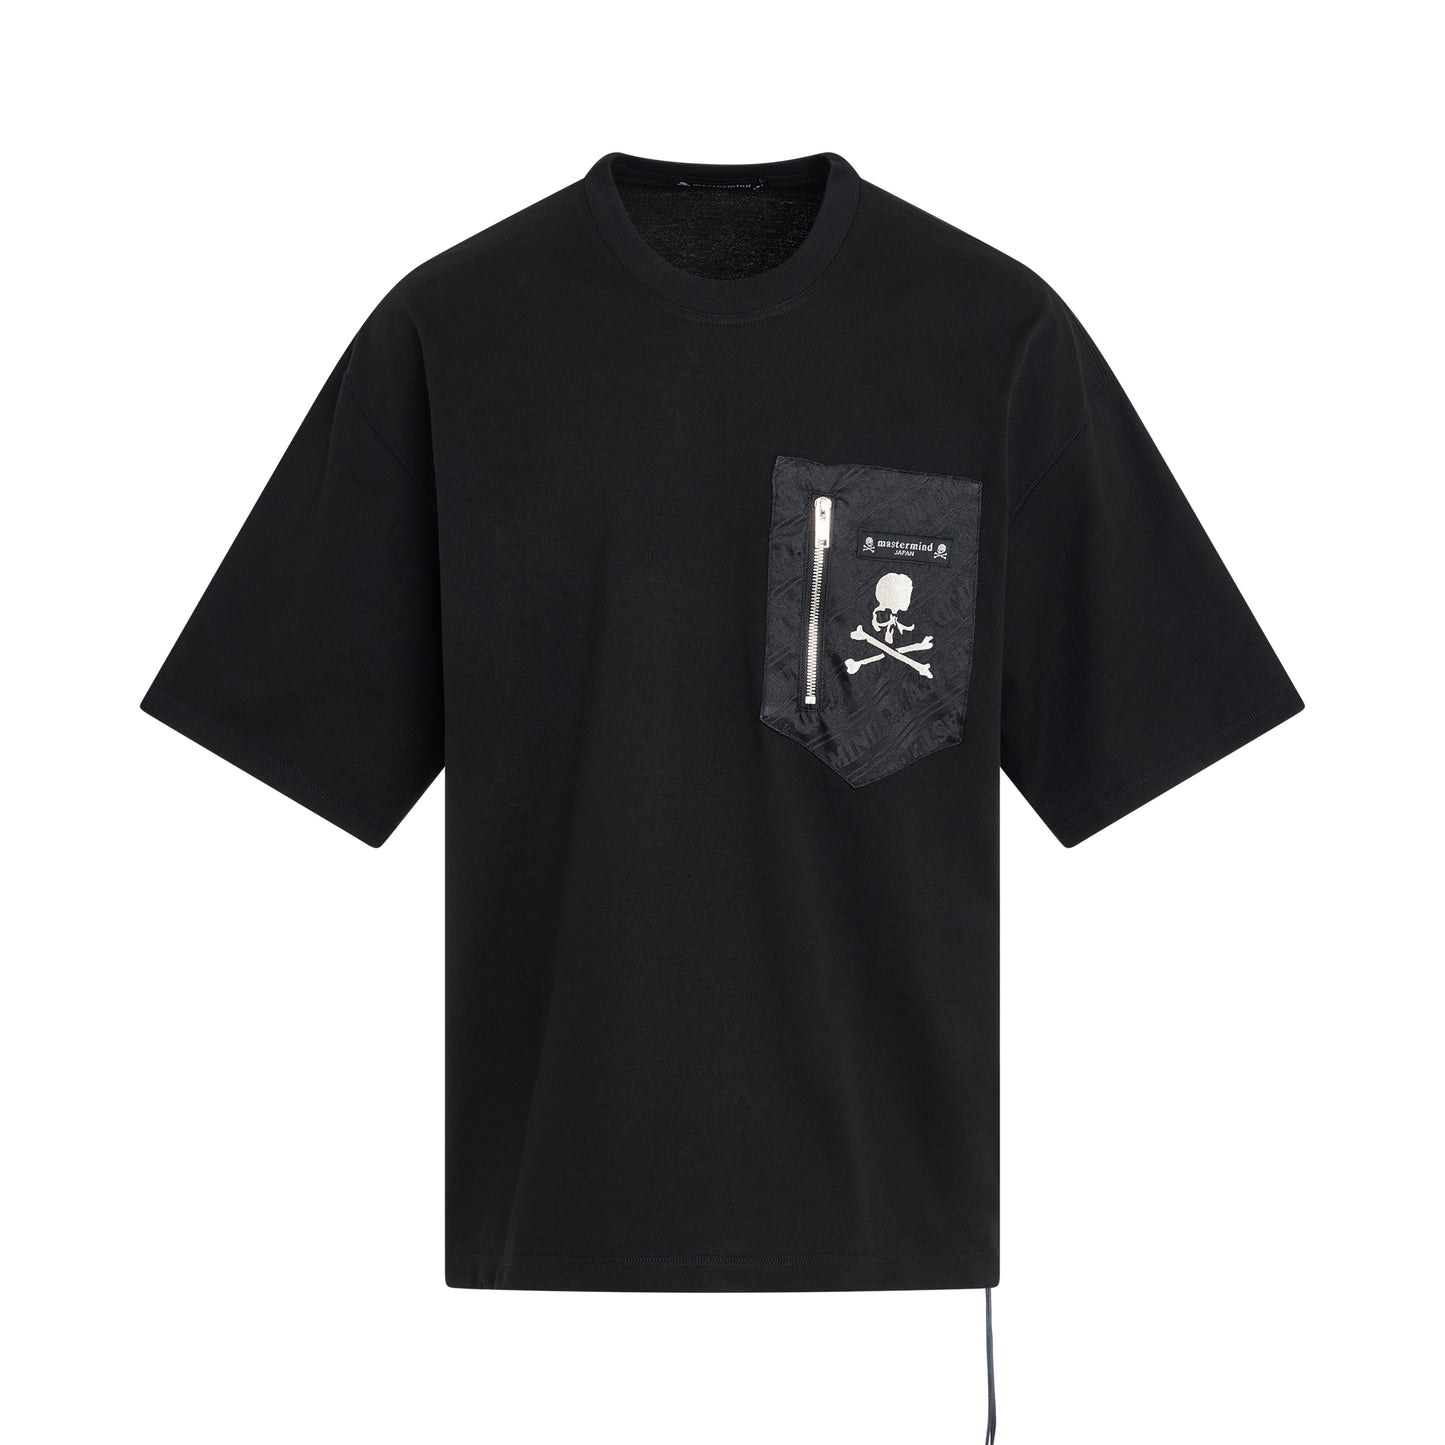 Pocket Boxy Fit T-Shirt in Black